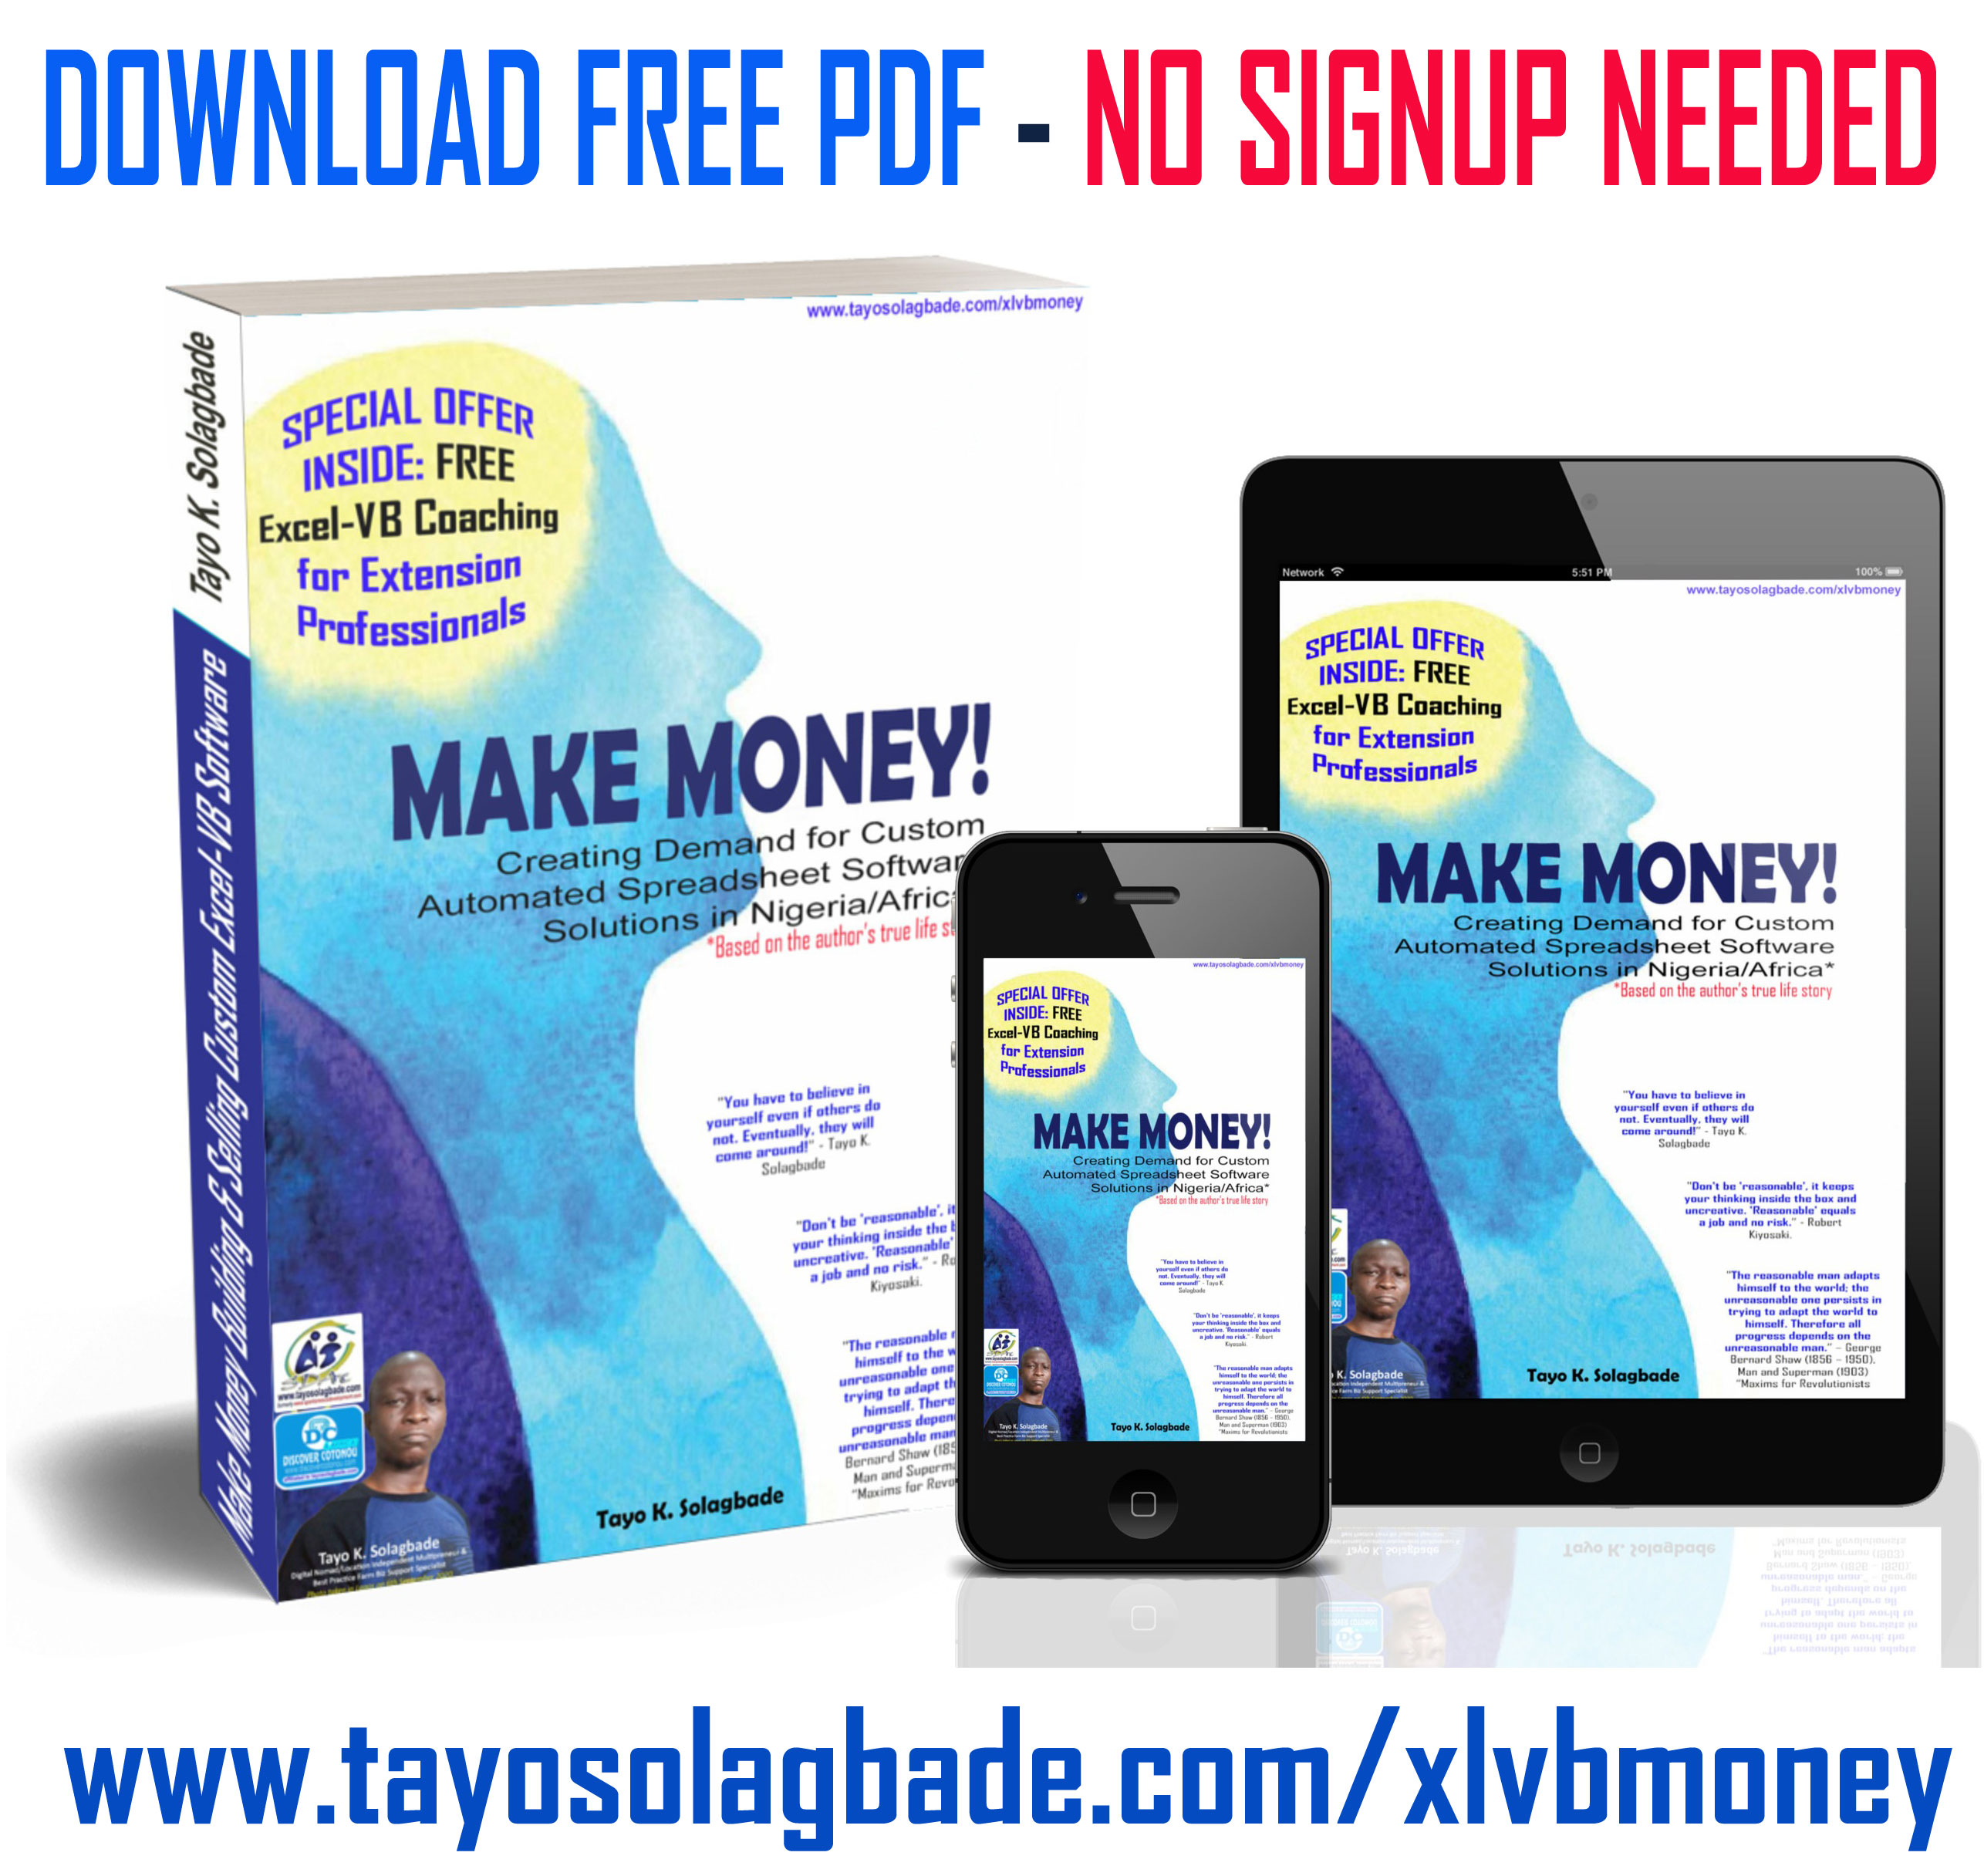 [PDF & VIDEO] Make Money Building & Selling Custom Excel-VB Software to Profitable Niche markets | FREE Excel-VB Coaching for Extension